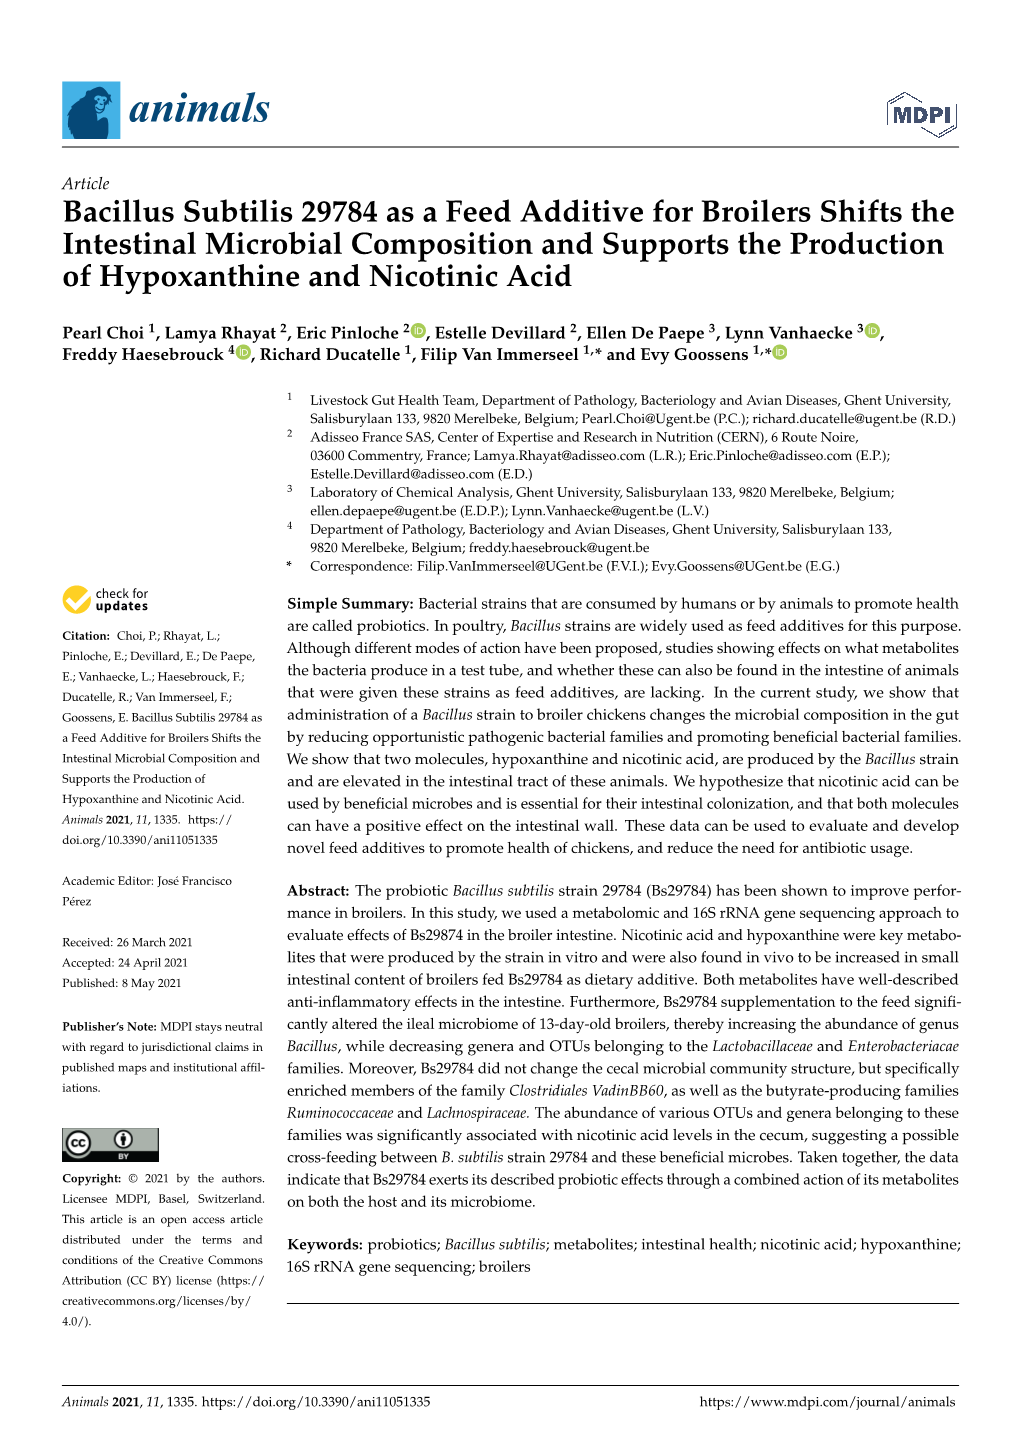 Bacillus Subtilis 29784 As a Feed Additive for Broilers Shifts the Intestinal Microbial Composition and Supports the Production of Hypoxanthine and Nicotinic Acid